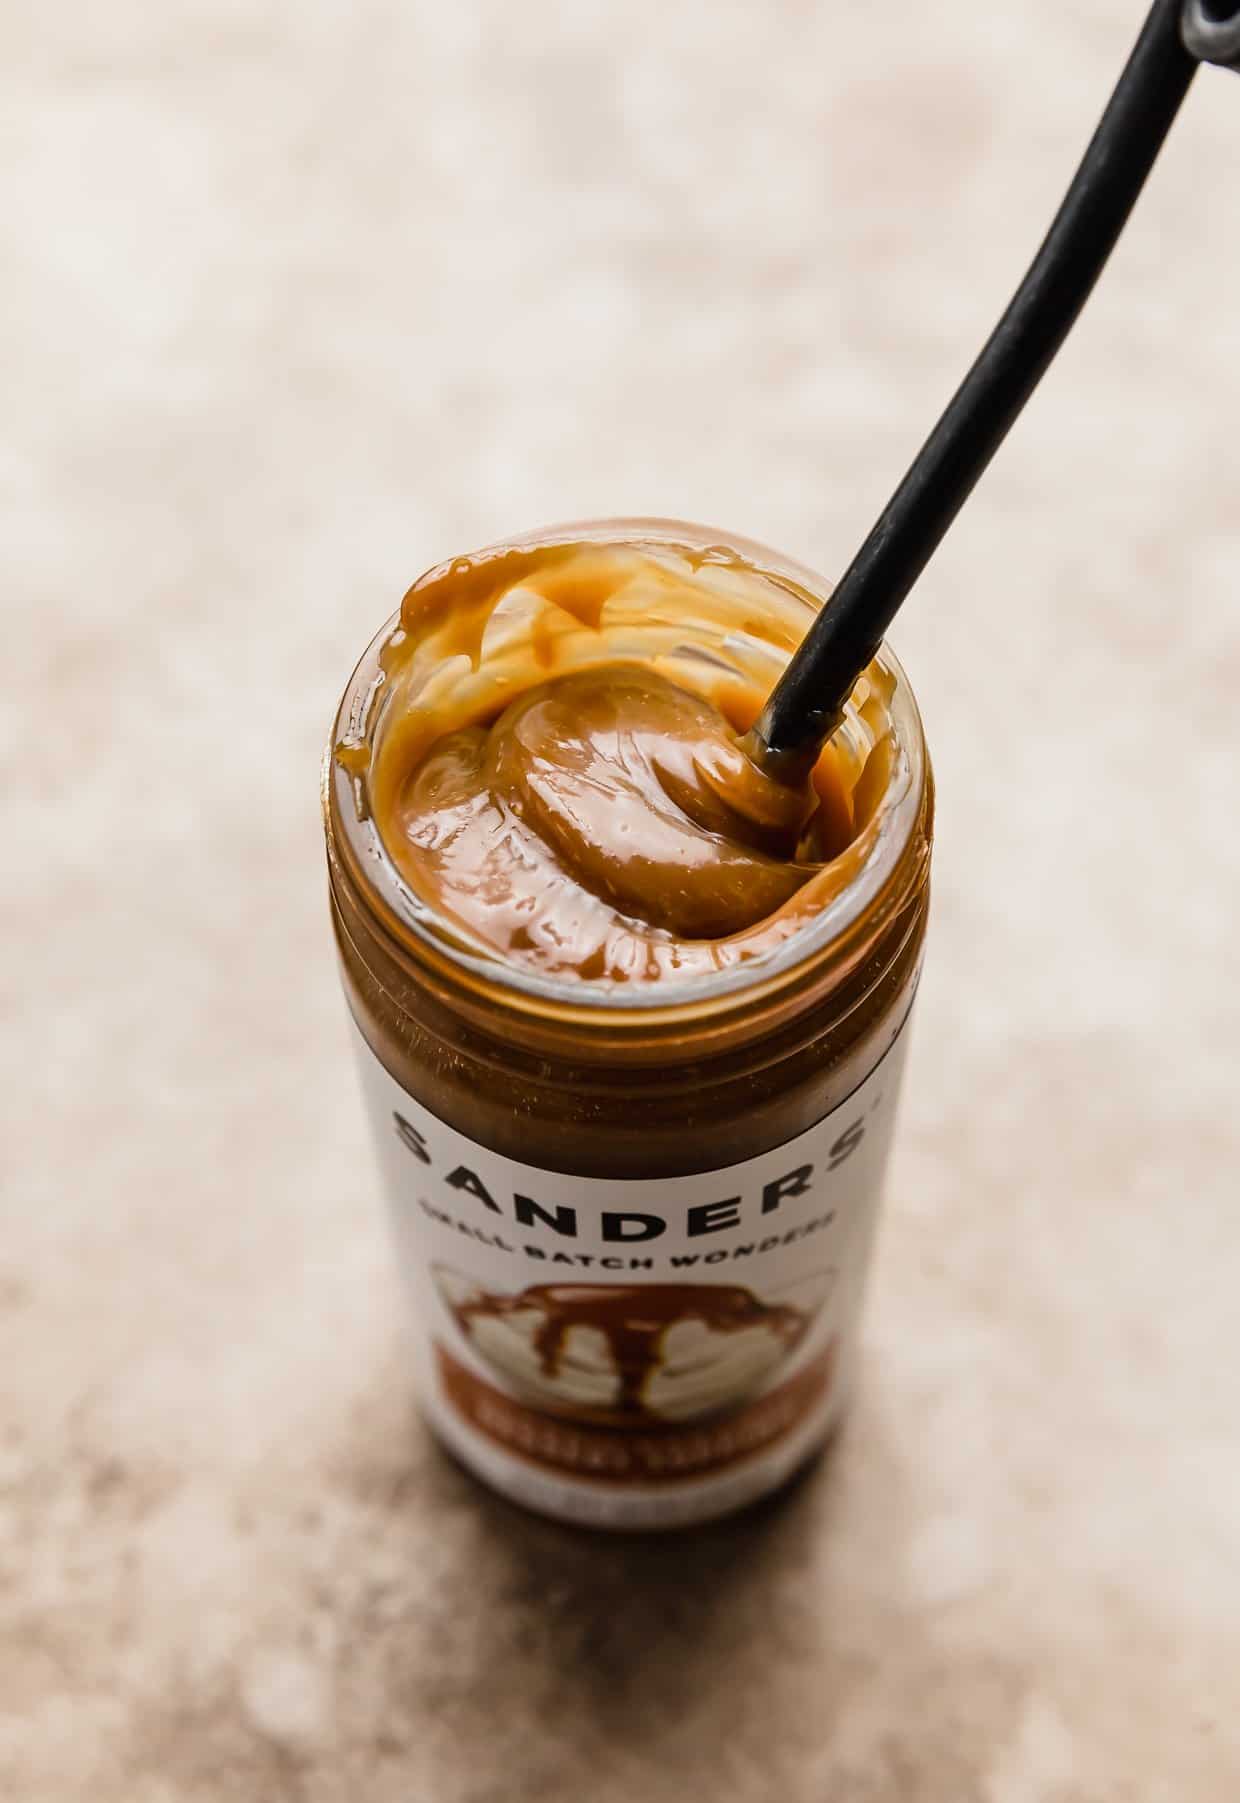 A jar of sanders caramel with a spoon in the caramel.